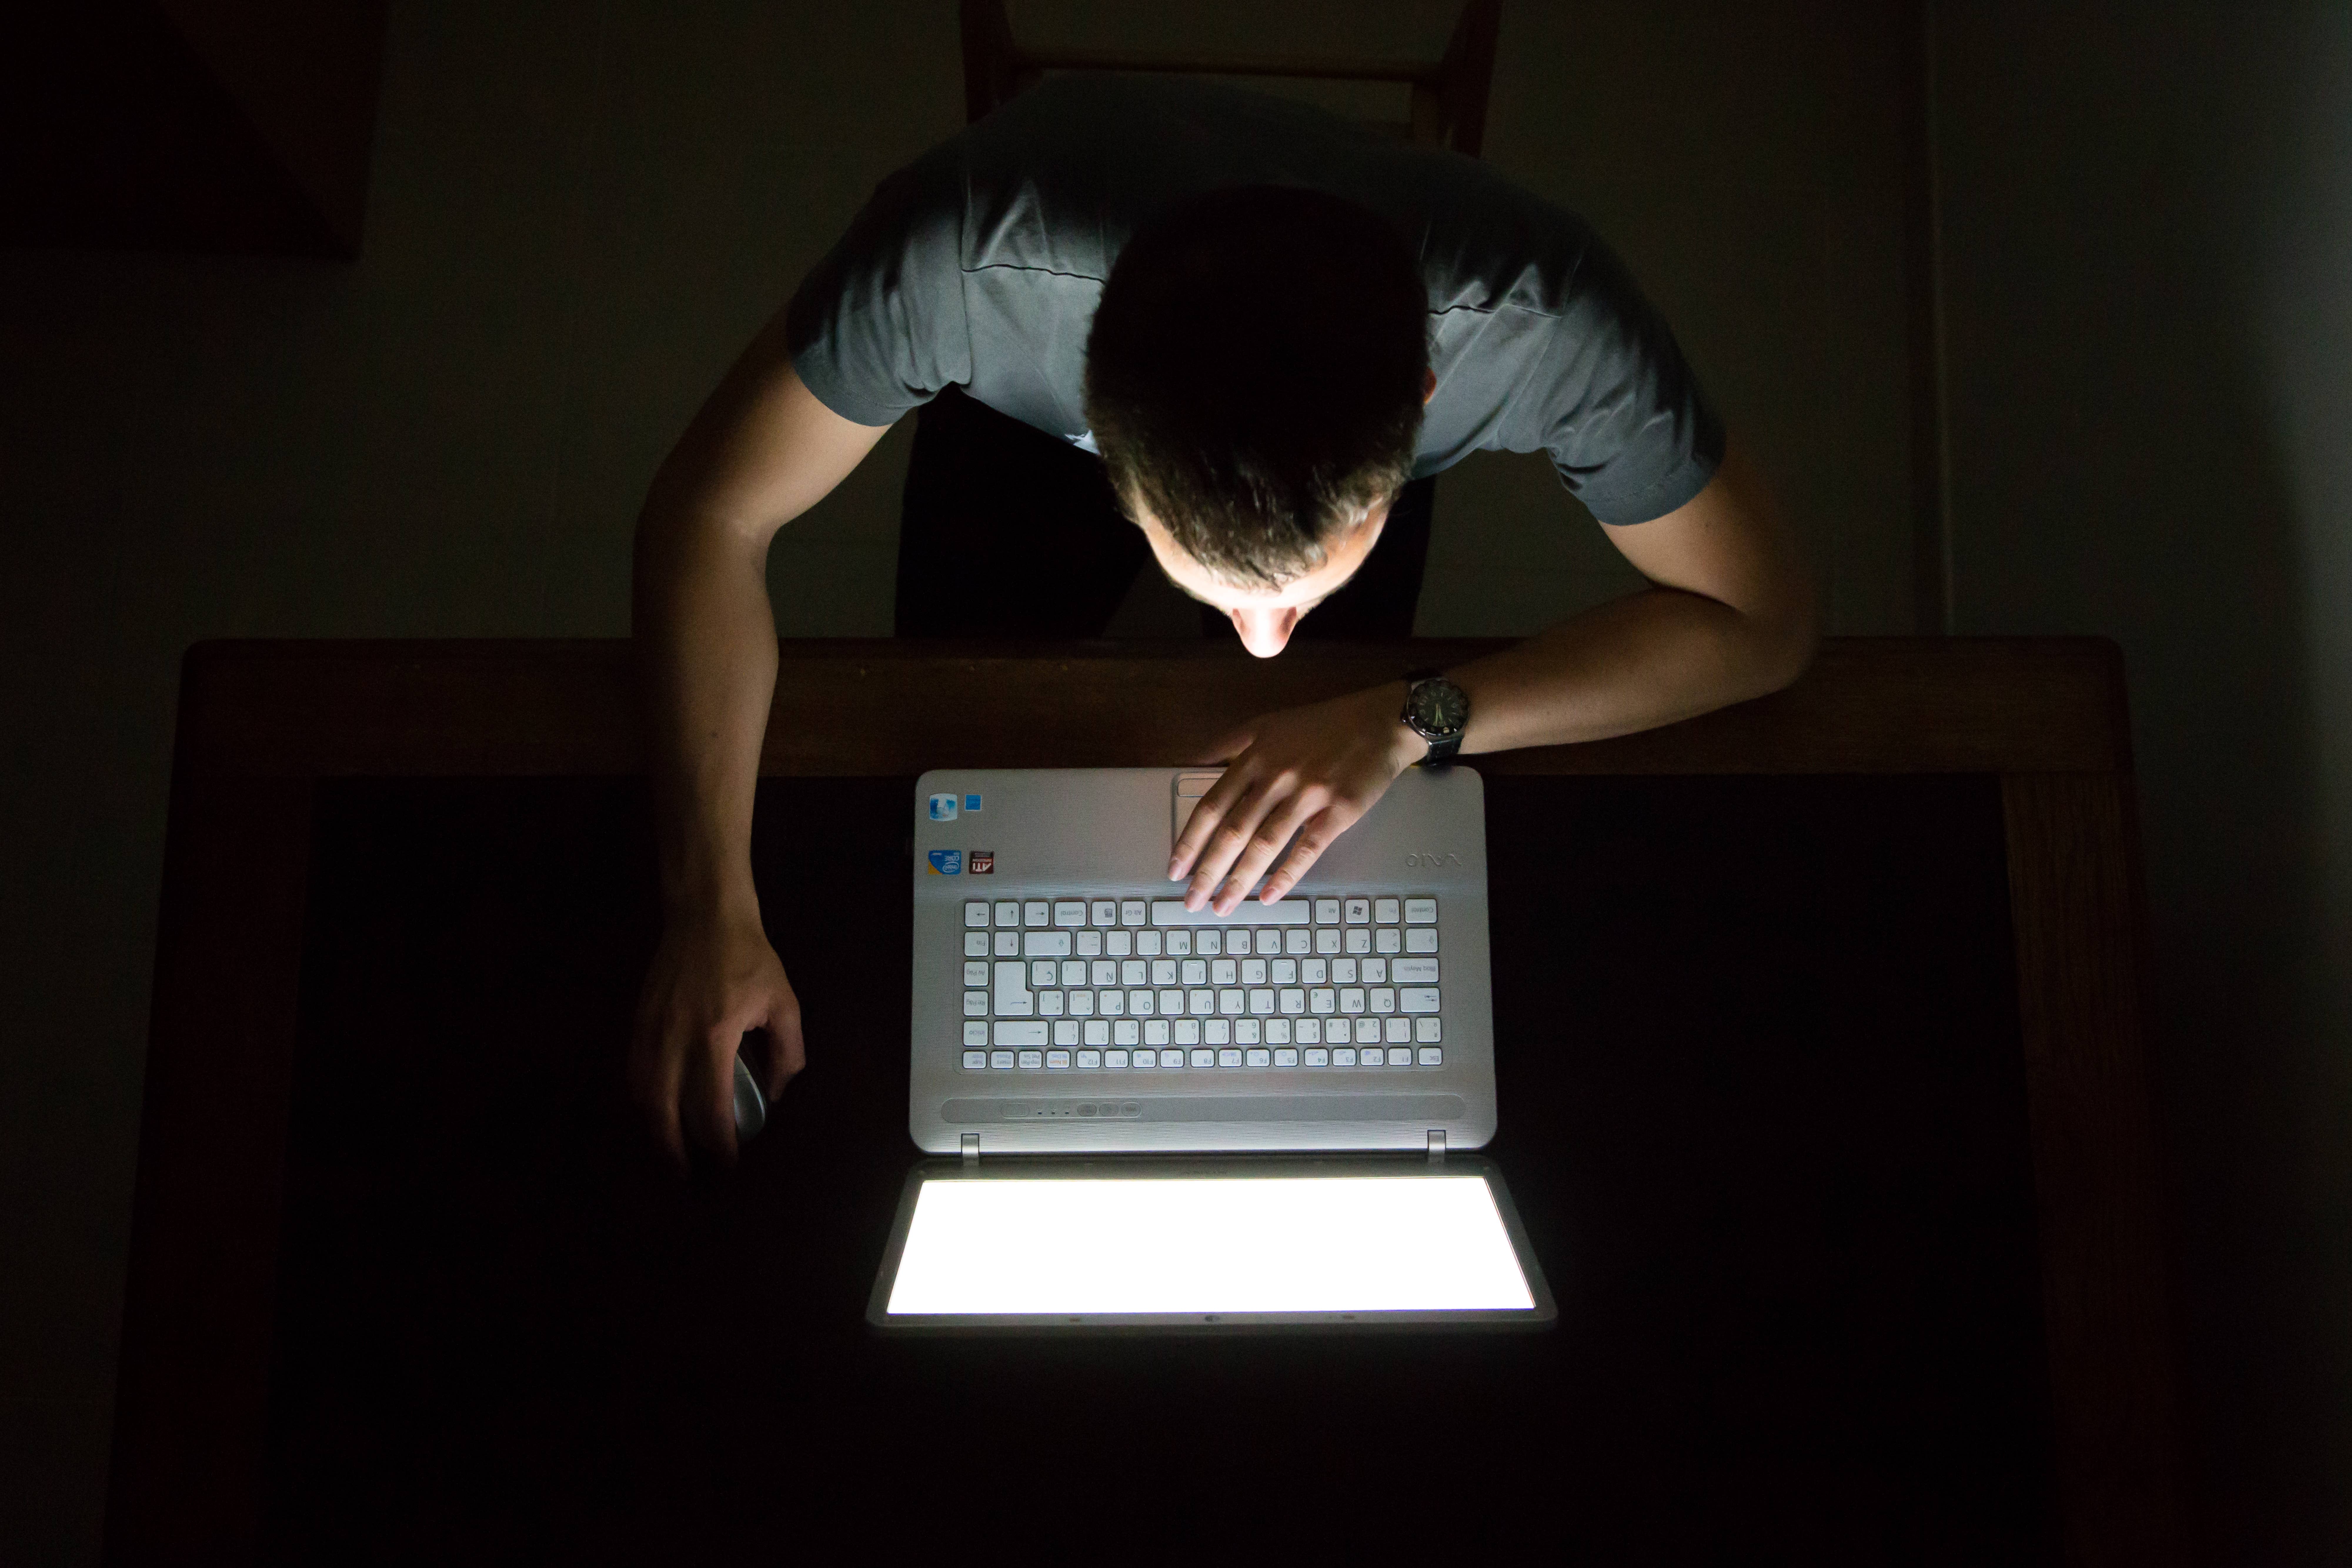 This is a photo of a man on the computer in a dark room.